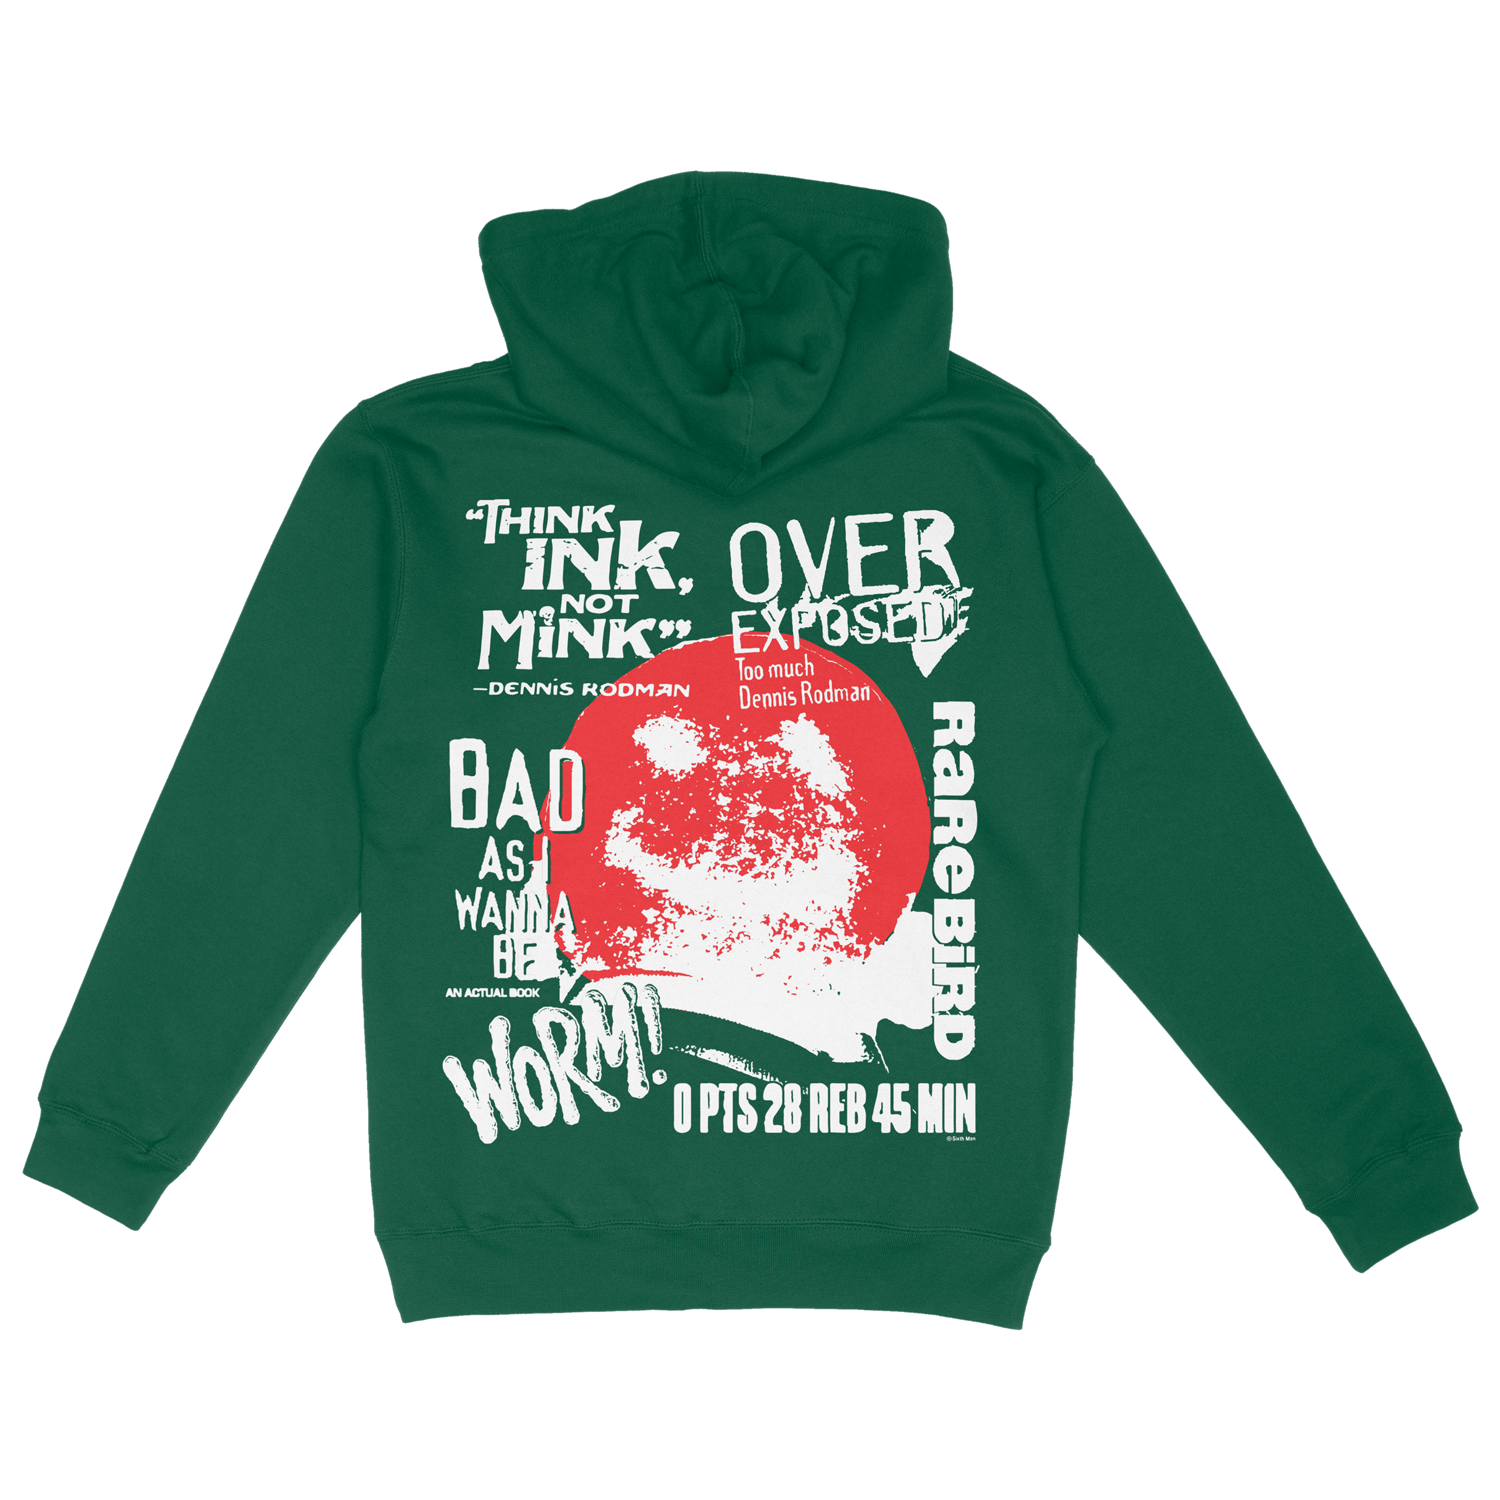 Back of the green hoodie featuring a screen-printed image of the back of Dennis Rodman's shaved head with a smiley face design. The design also includes Dennis Rodman quotes and headlines, adding a distinctive and expressive touch to this unique piece of sports and pop culture-inspired apparel.